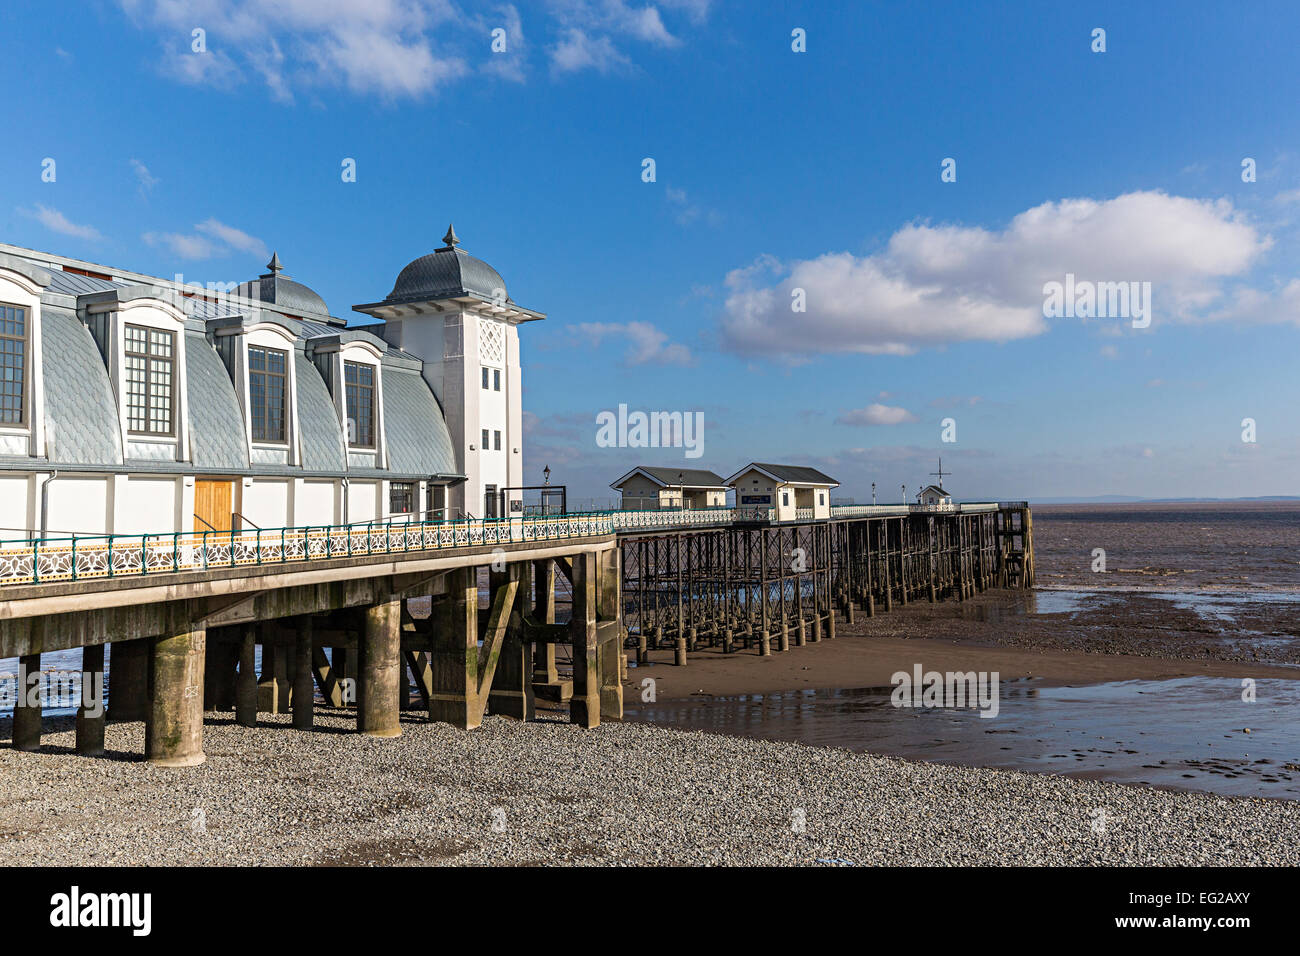 The renovated Victorian pier at Penarth, Wales, UK Stock Photo